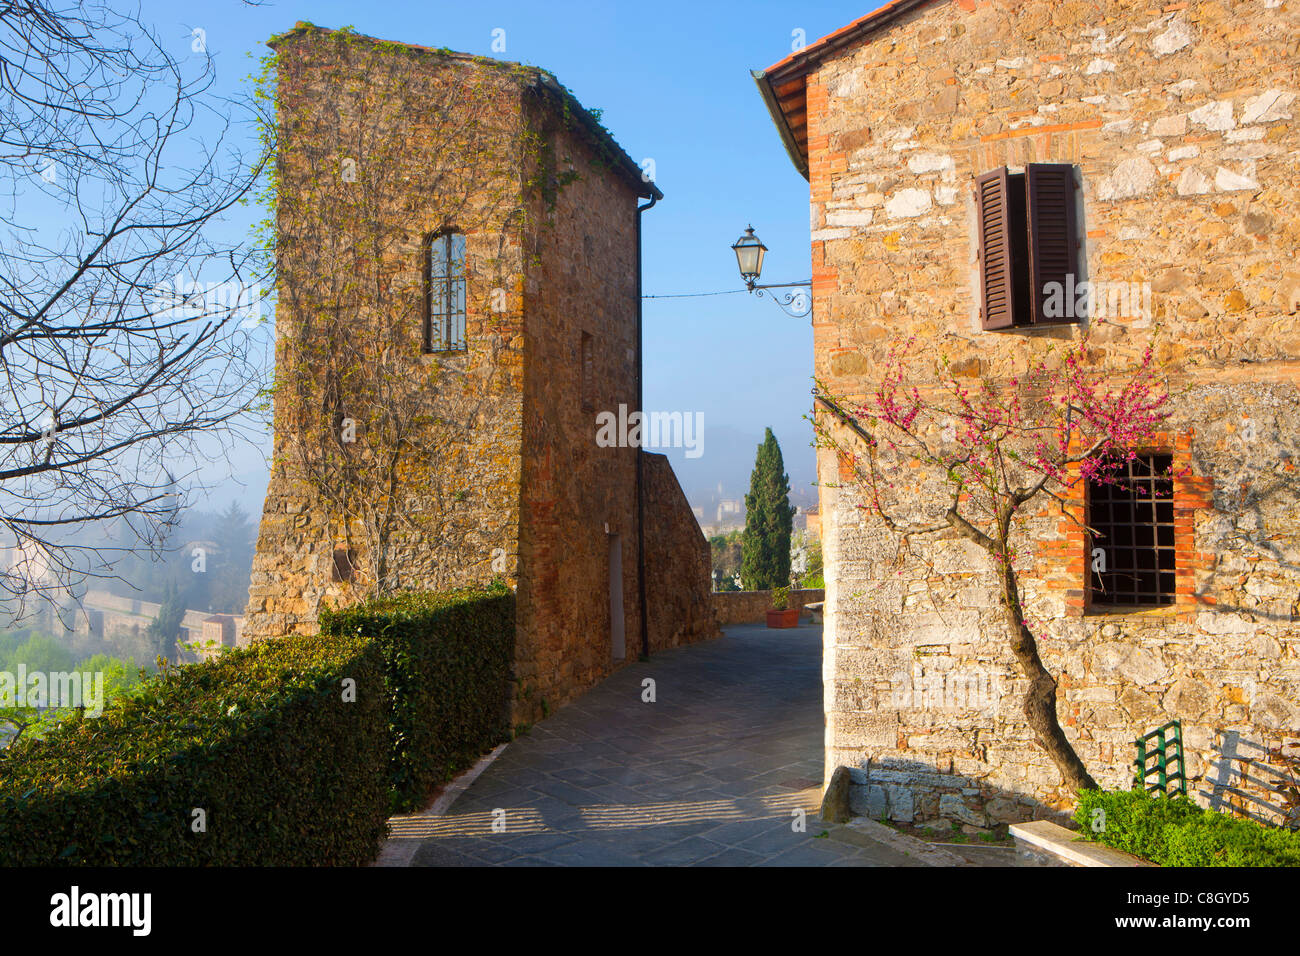 San Quirico d'Orcia, Italy, Europe, Tuscany, town, city, Old Town, lane, houses, homes, Stock Photo